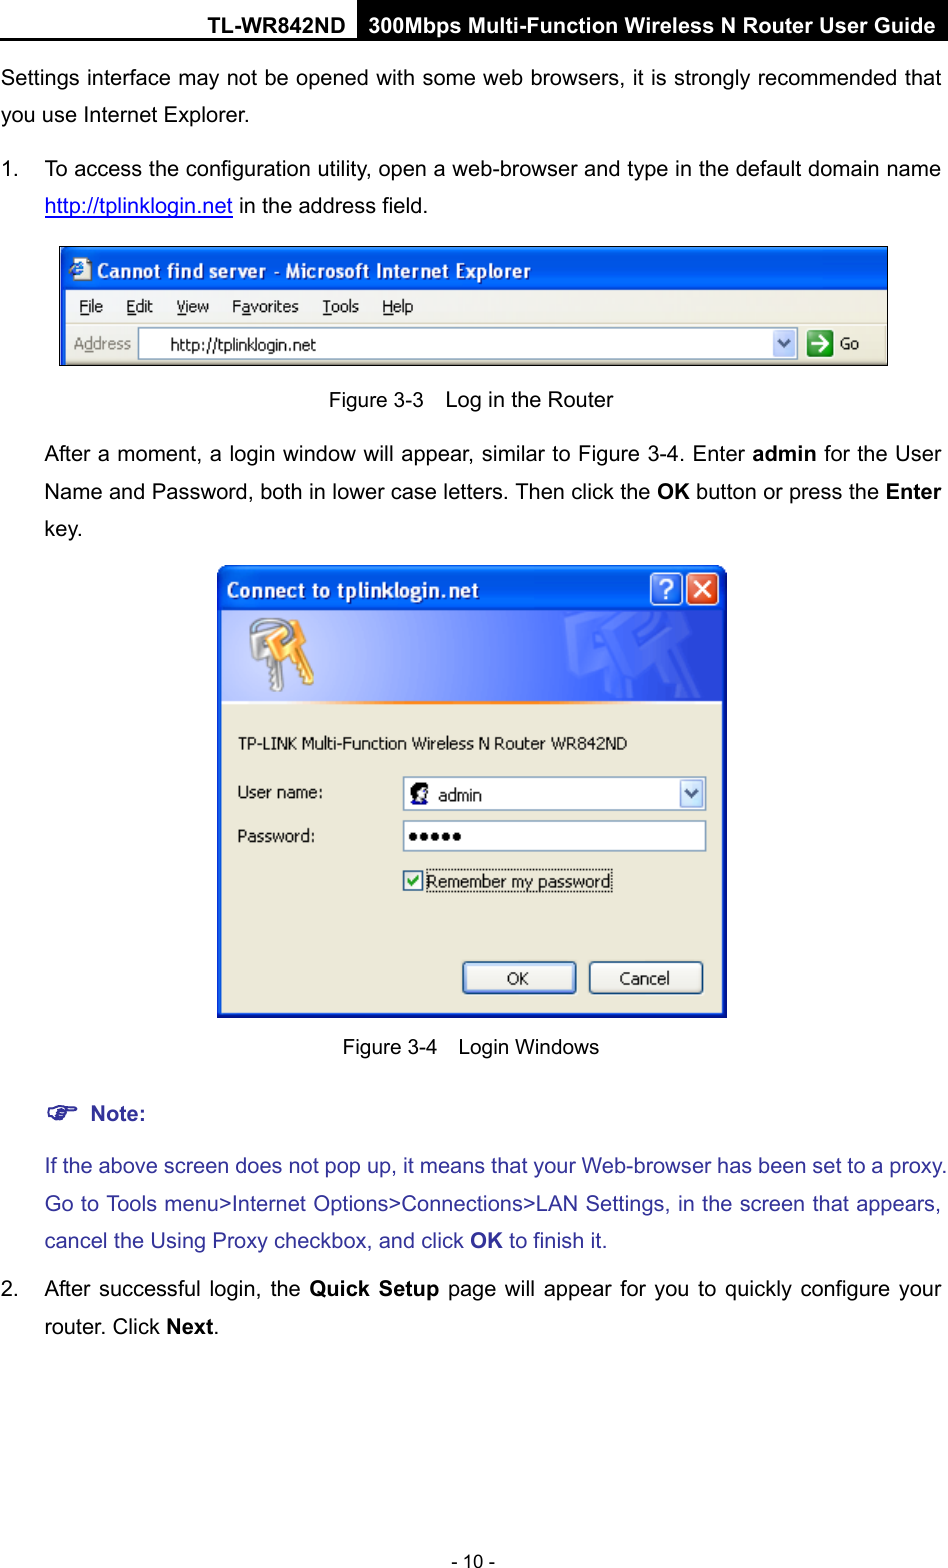 TL-WR842ND 300Mbps Multi-Function Wireless N Router User Guide  - 10 - Settings interface may not be opened with some web browsers, it is strongly recommended that you use Internet Explorer. 1. To access the configuration utility, open a web-browser and type in the default domain name http://tplinklogin.net in the address field.  Figure 3-3  Log in the Router After a moment, a login window will appear, similar to Figure 3-4. Enter admin for the User Name and Password, both in lower case letters. Then click the OK button or press the Enter key.  Figure 3-4  Login Windows  Note: If the above screen does not pop up, it means that your Web-browser has been set to a proxy. Go to Tools menu&gt;Internet Options&gt;Connections&gt;LAN Settings, in the screen that appears, cancel the Using Proxy checkbox, and click OK to finish it. 2. After successful login,  the Quick Setup page will appear for you to quickly configure your router. Click Next. 